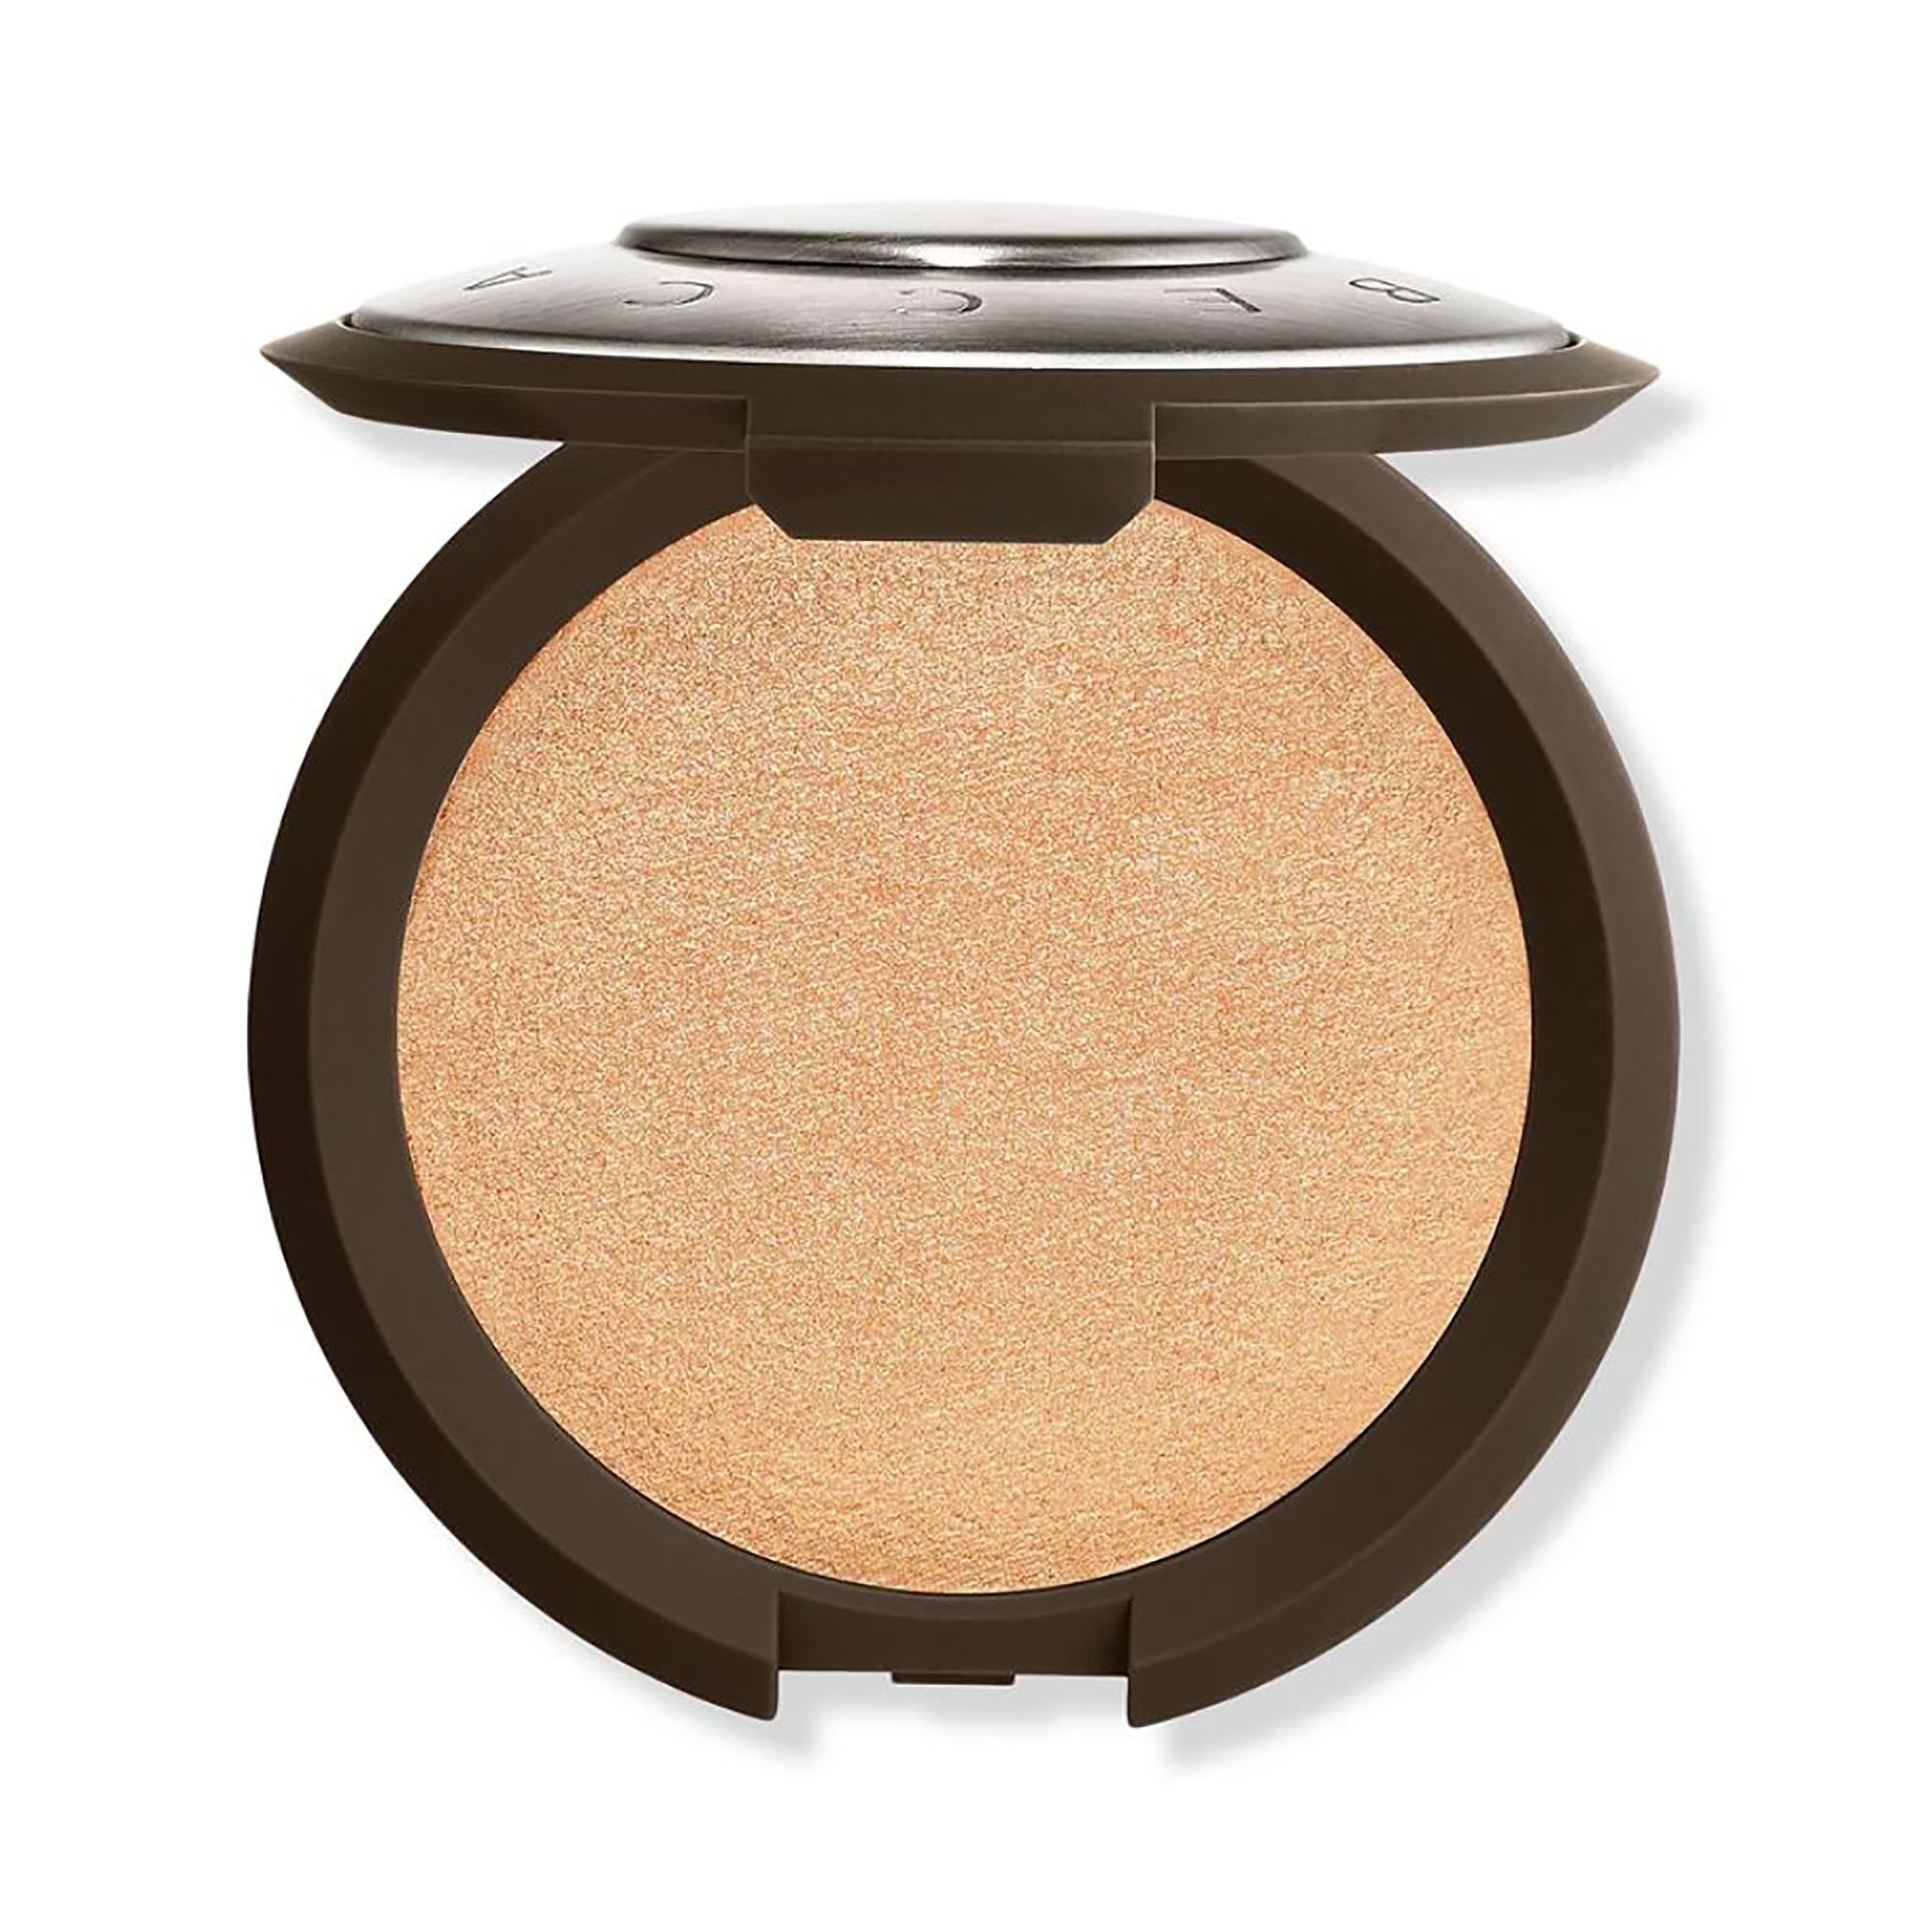 Smashbox X Becca Shimmering Skin Perfector Pressed Highlighter / CHAMPAGNE POP